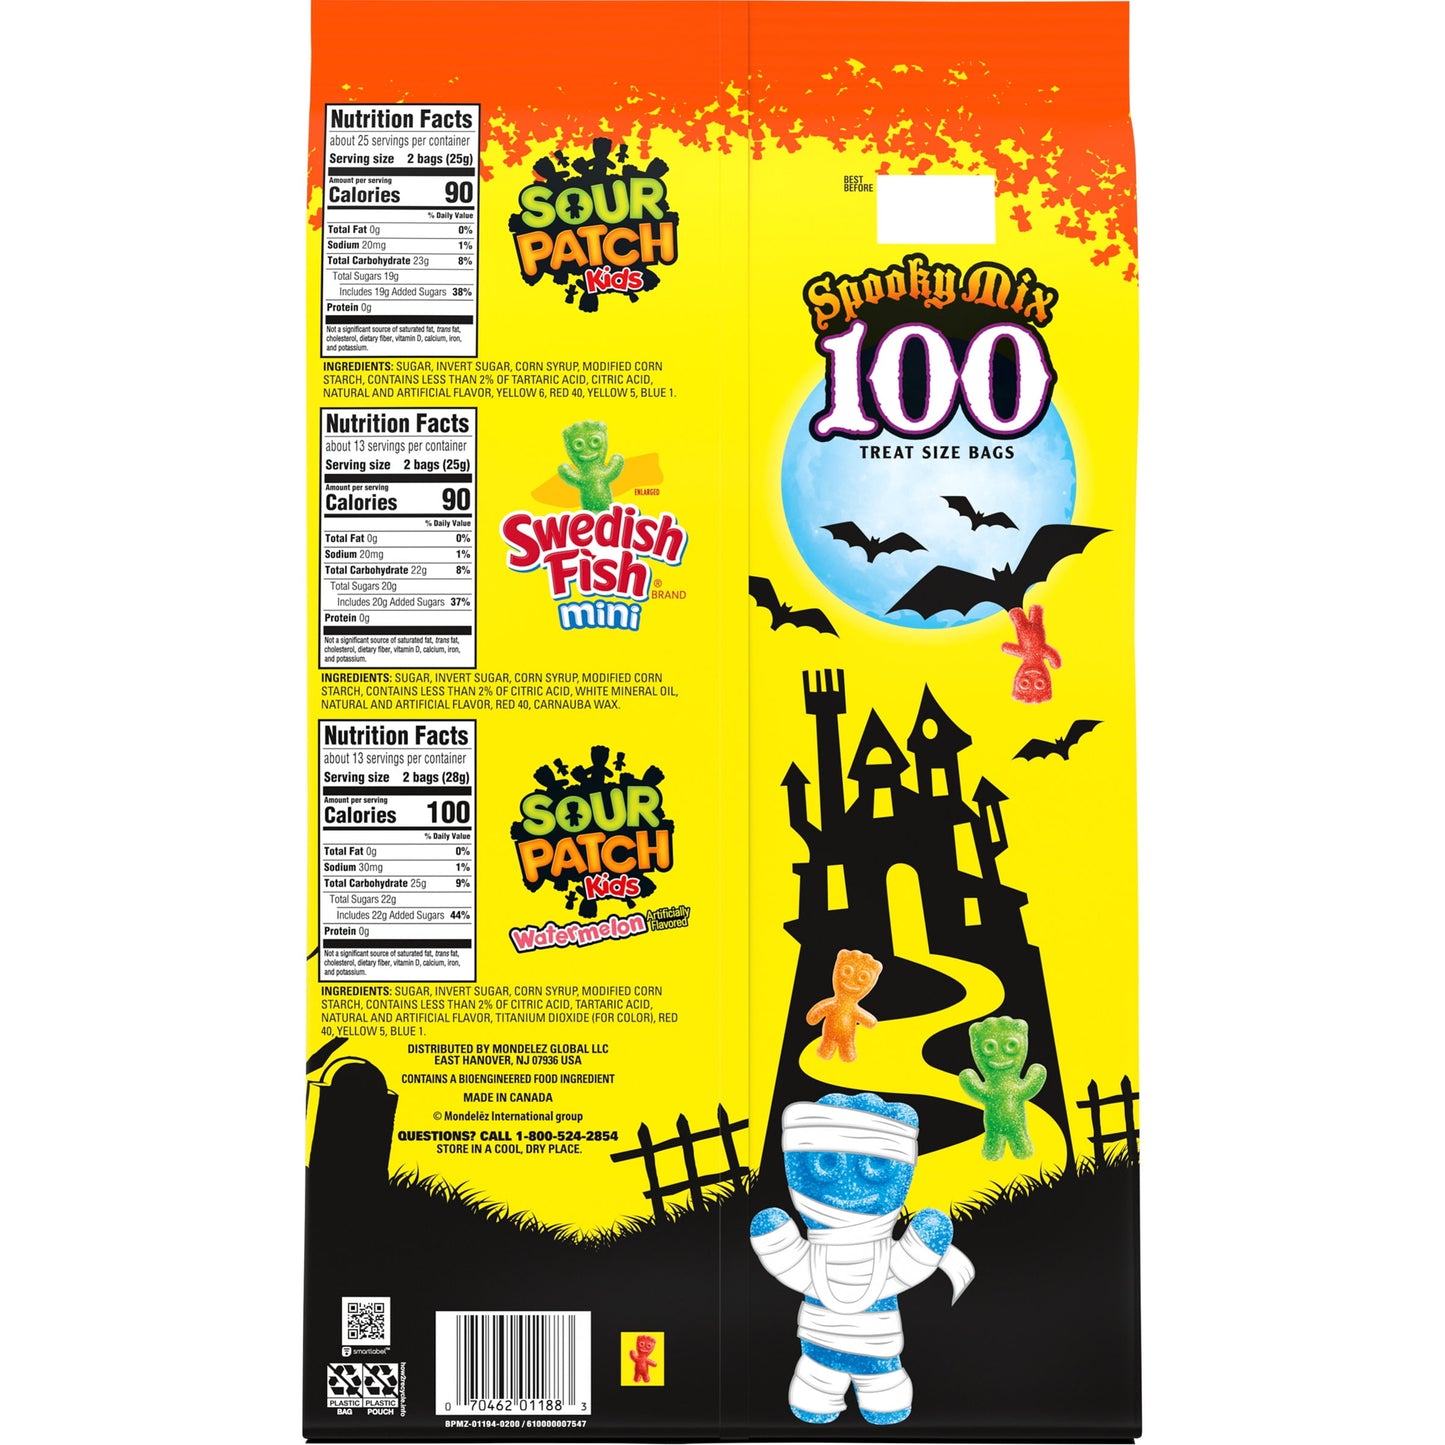 SOUR PATCH KIDS & SWEDISH FISH Mini Halloween Candy Variety Pack, 100 Trick or Treat Bags